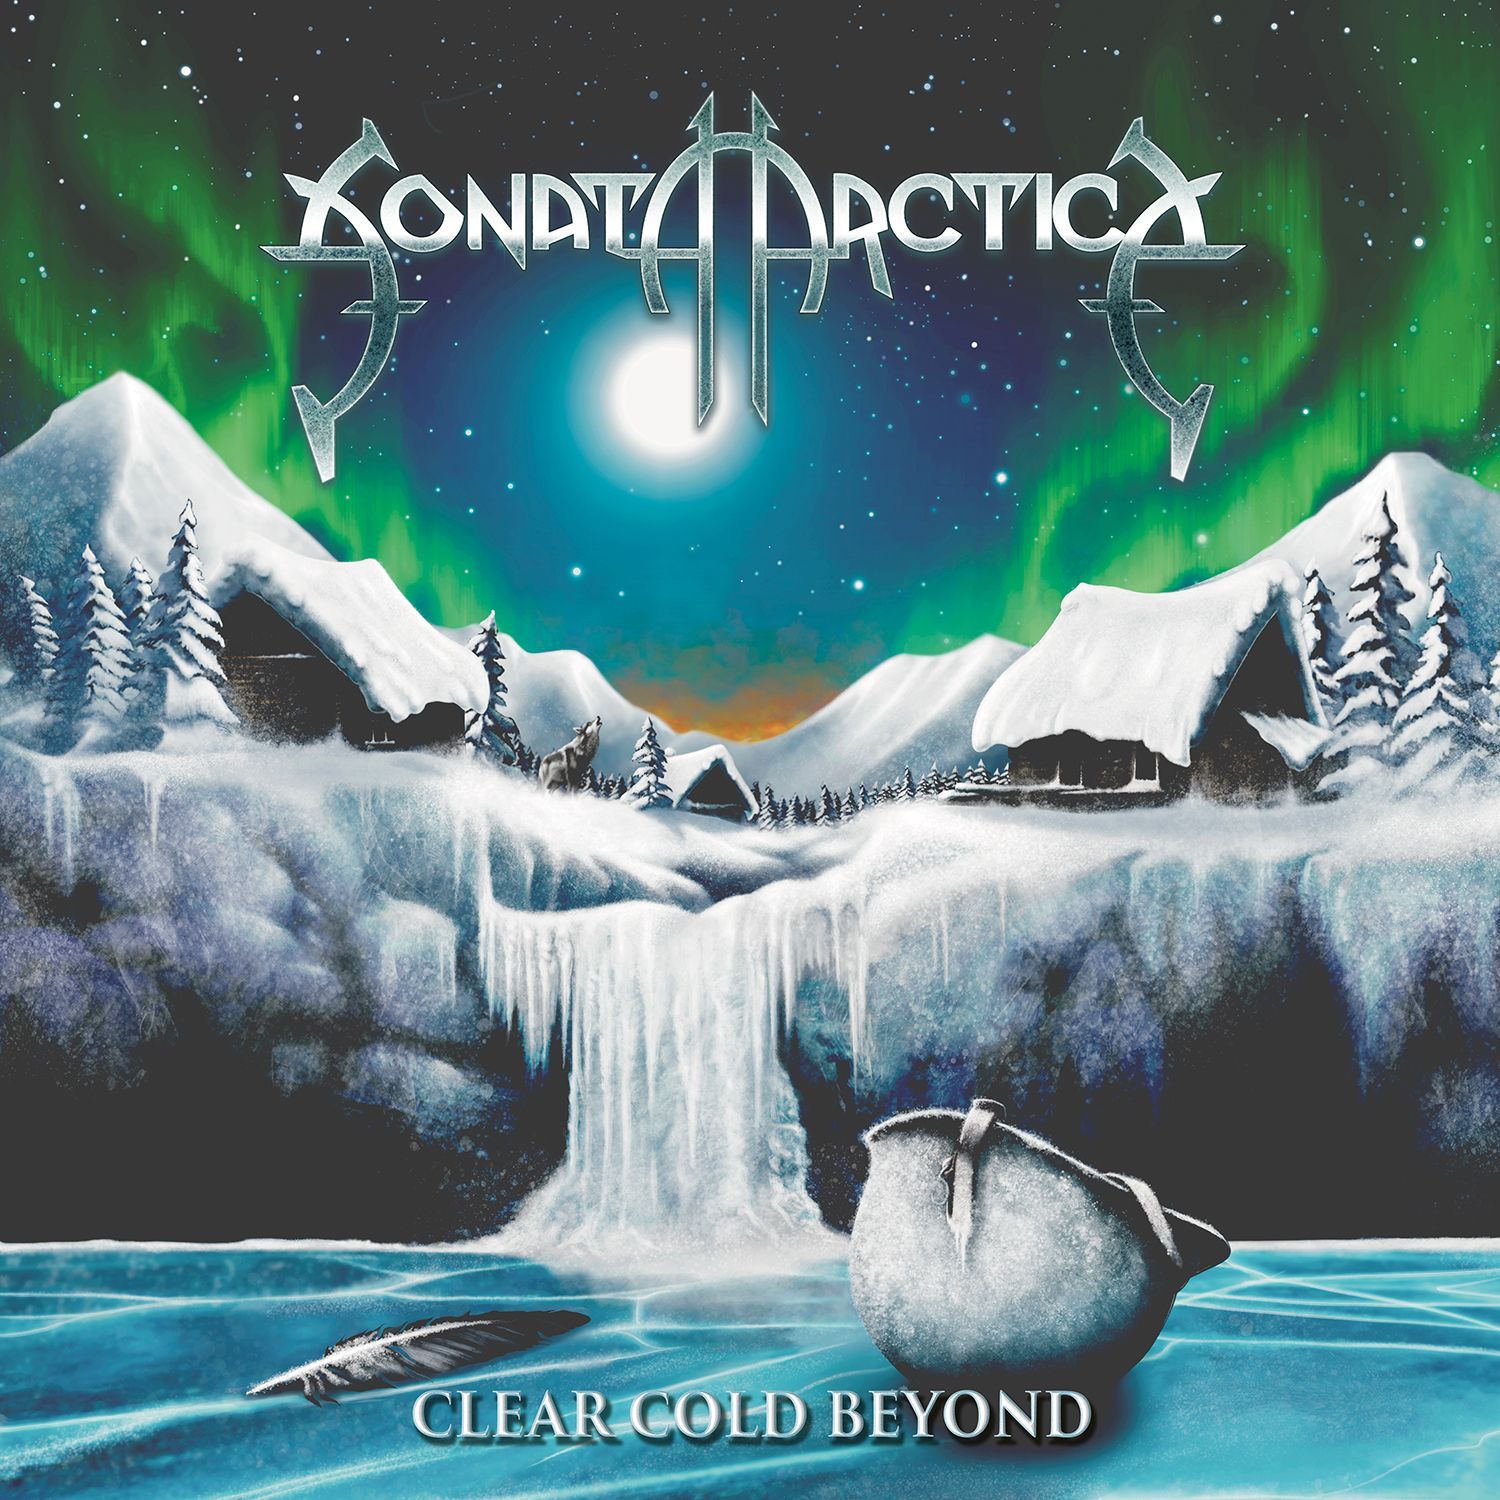 Sonata Arctica - A Monster Only You Can't See (lyric video)